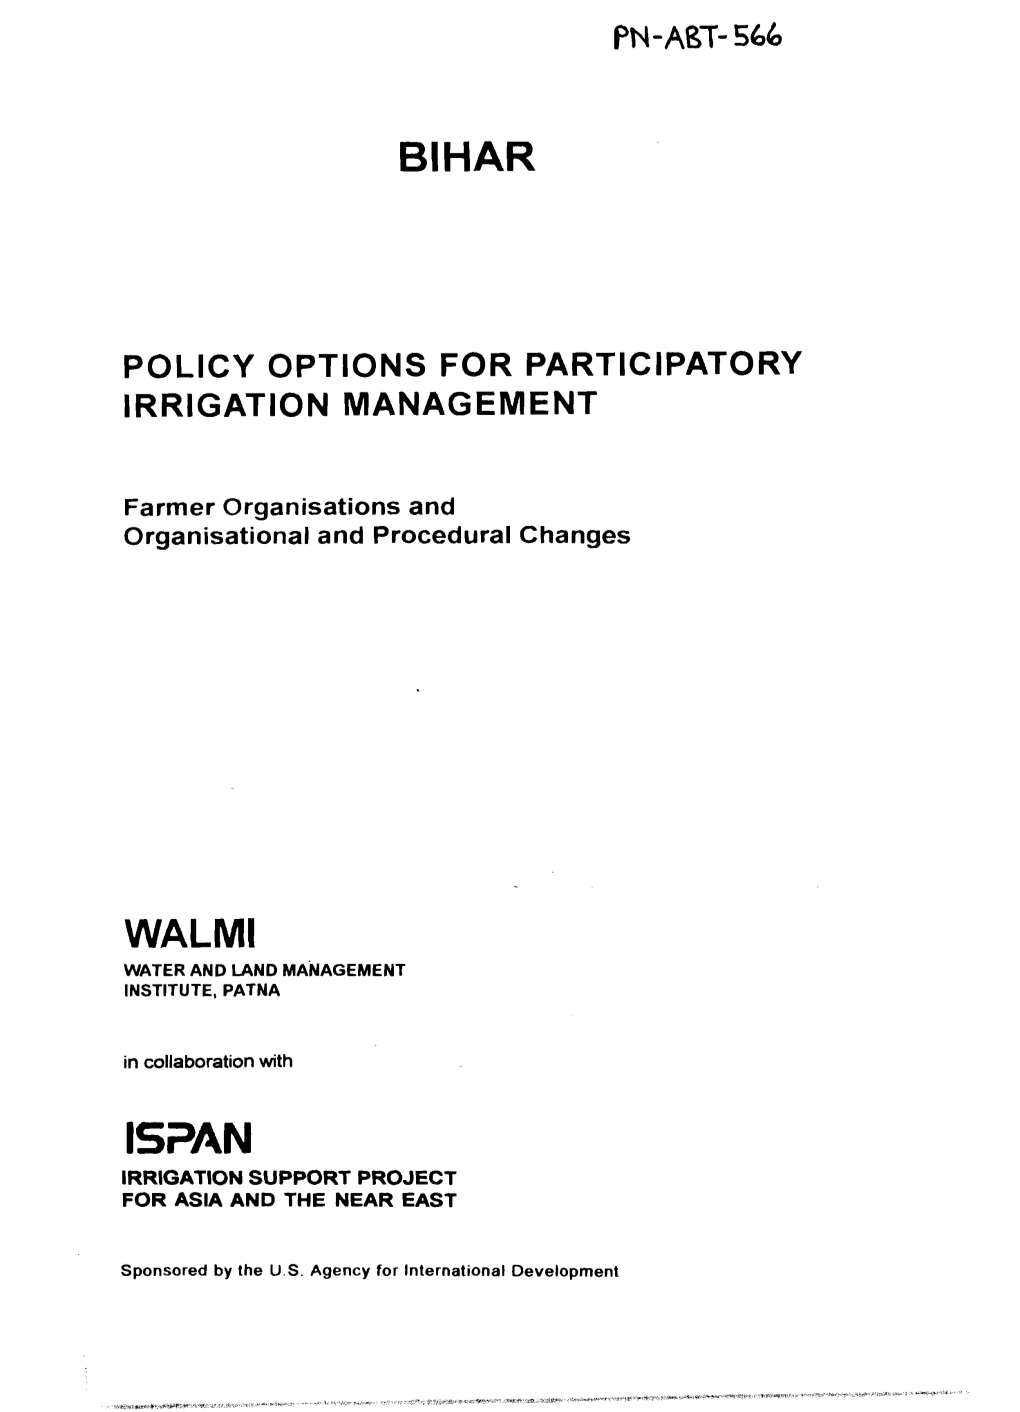 Policy Options for Participatory Irrigation Management